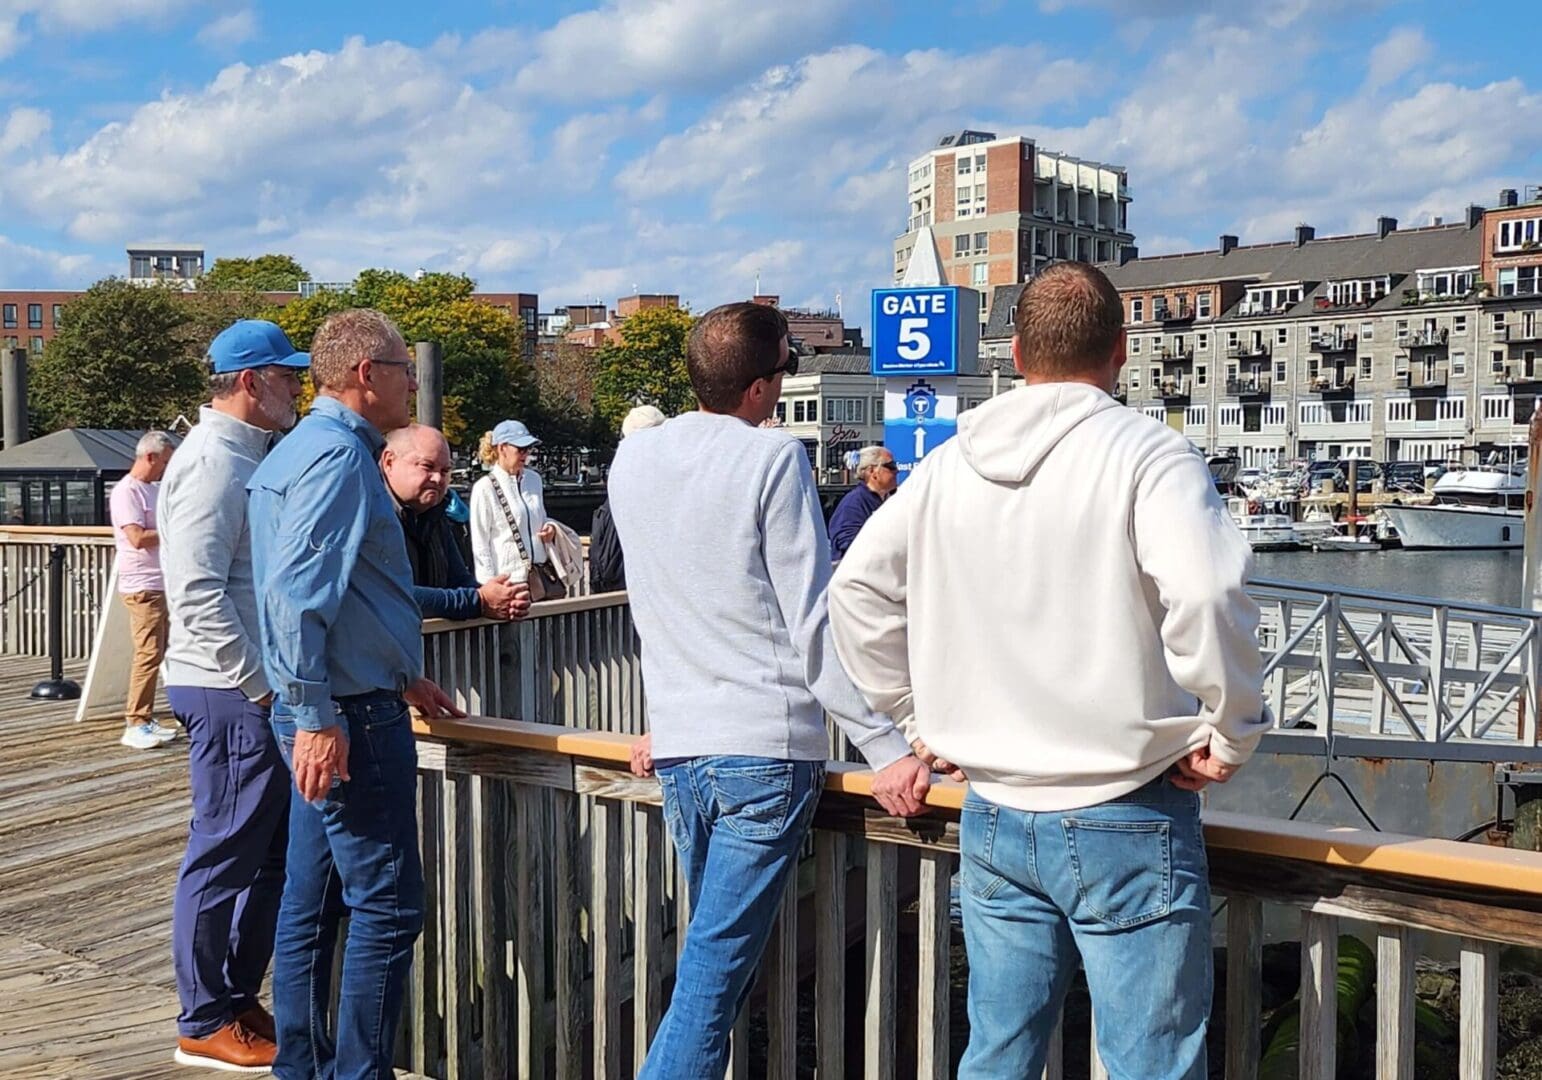 A group of people standing on top of a wooden deck.